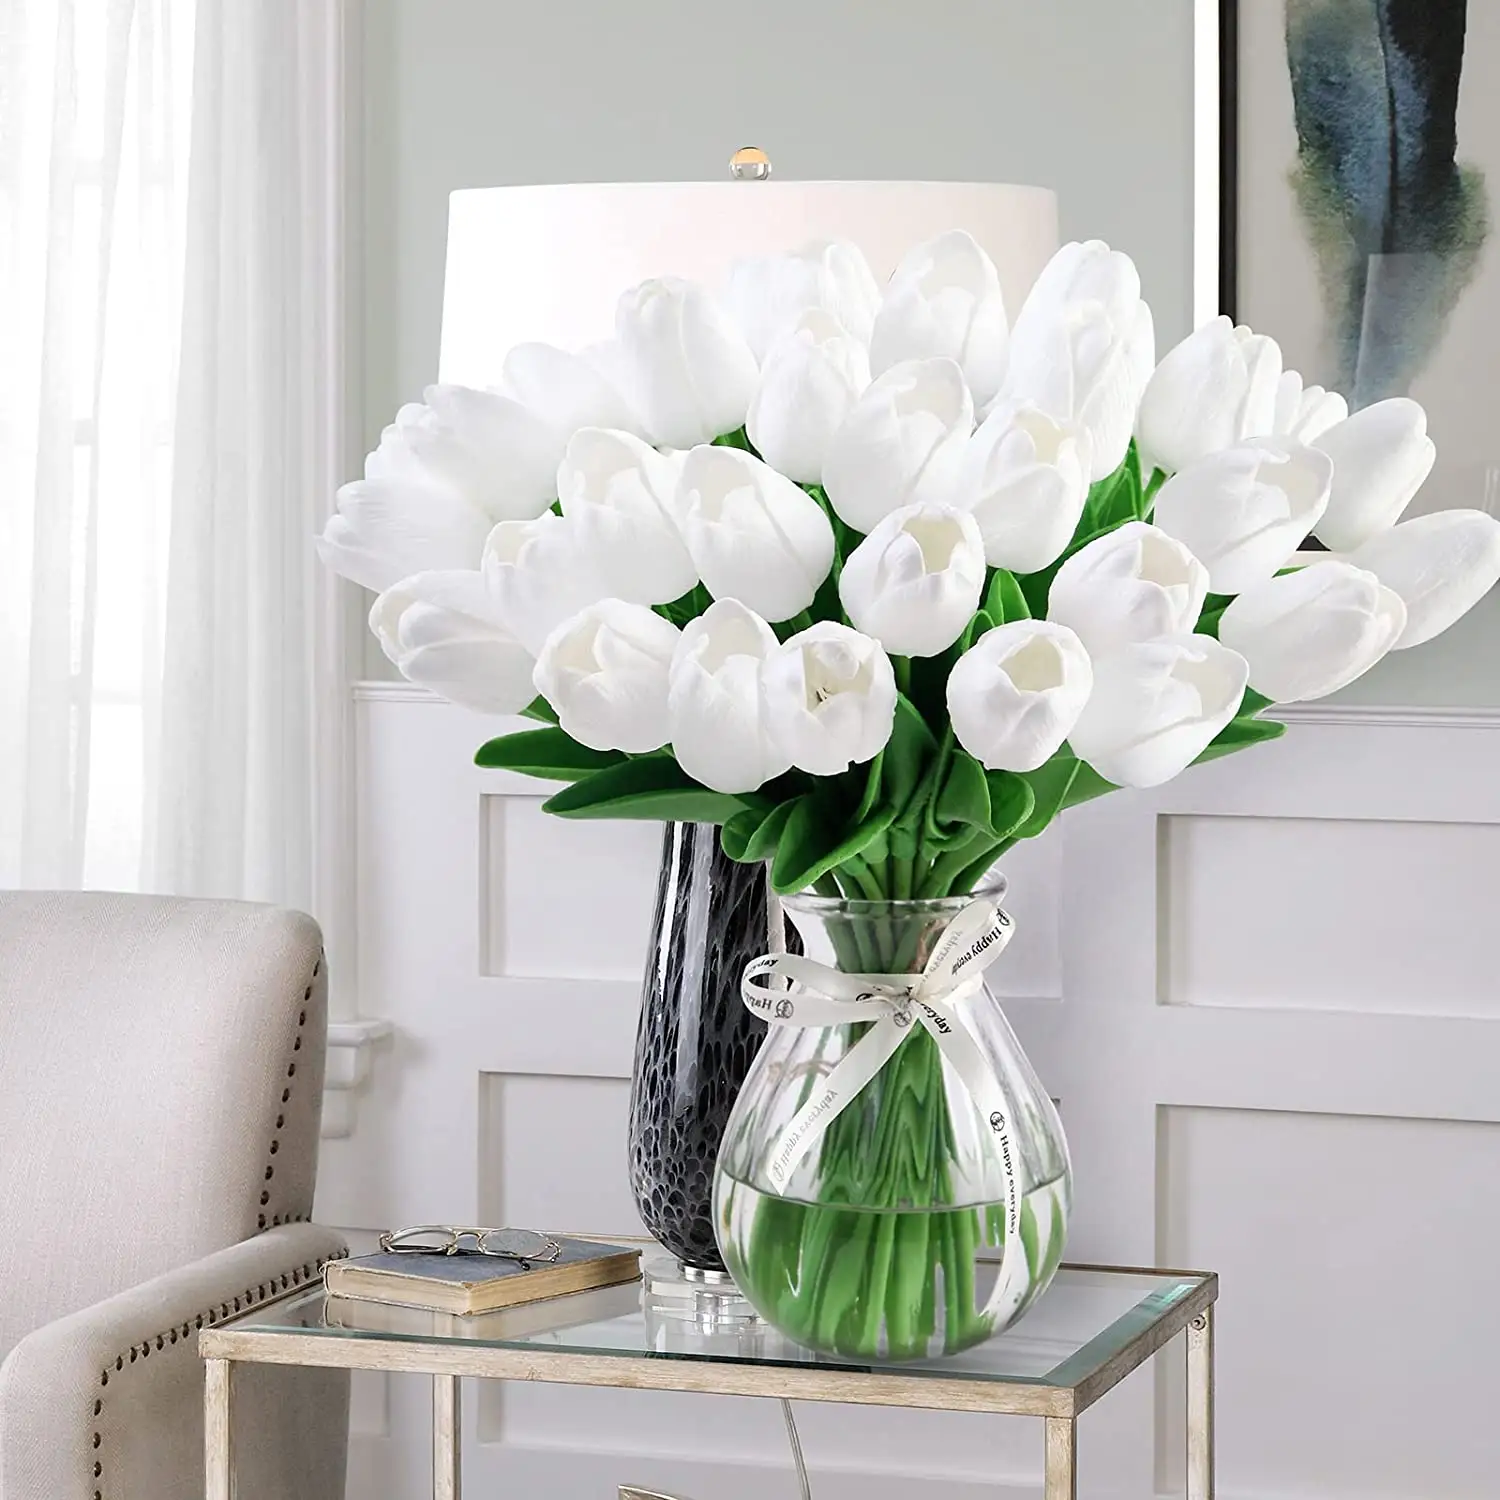 Artificial White Tulips Flowers Fake Tulips Real Touch Flowers for Spring Decoration Bouquet Vase Flower Arrangement